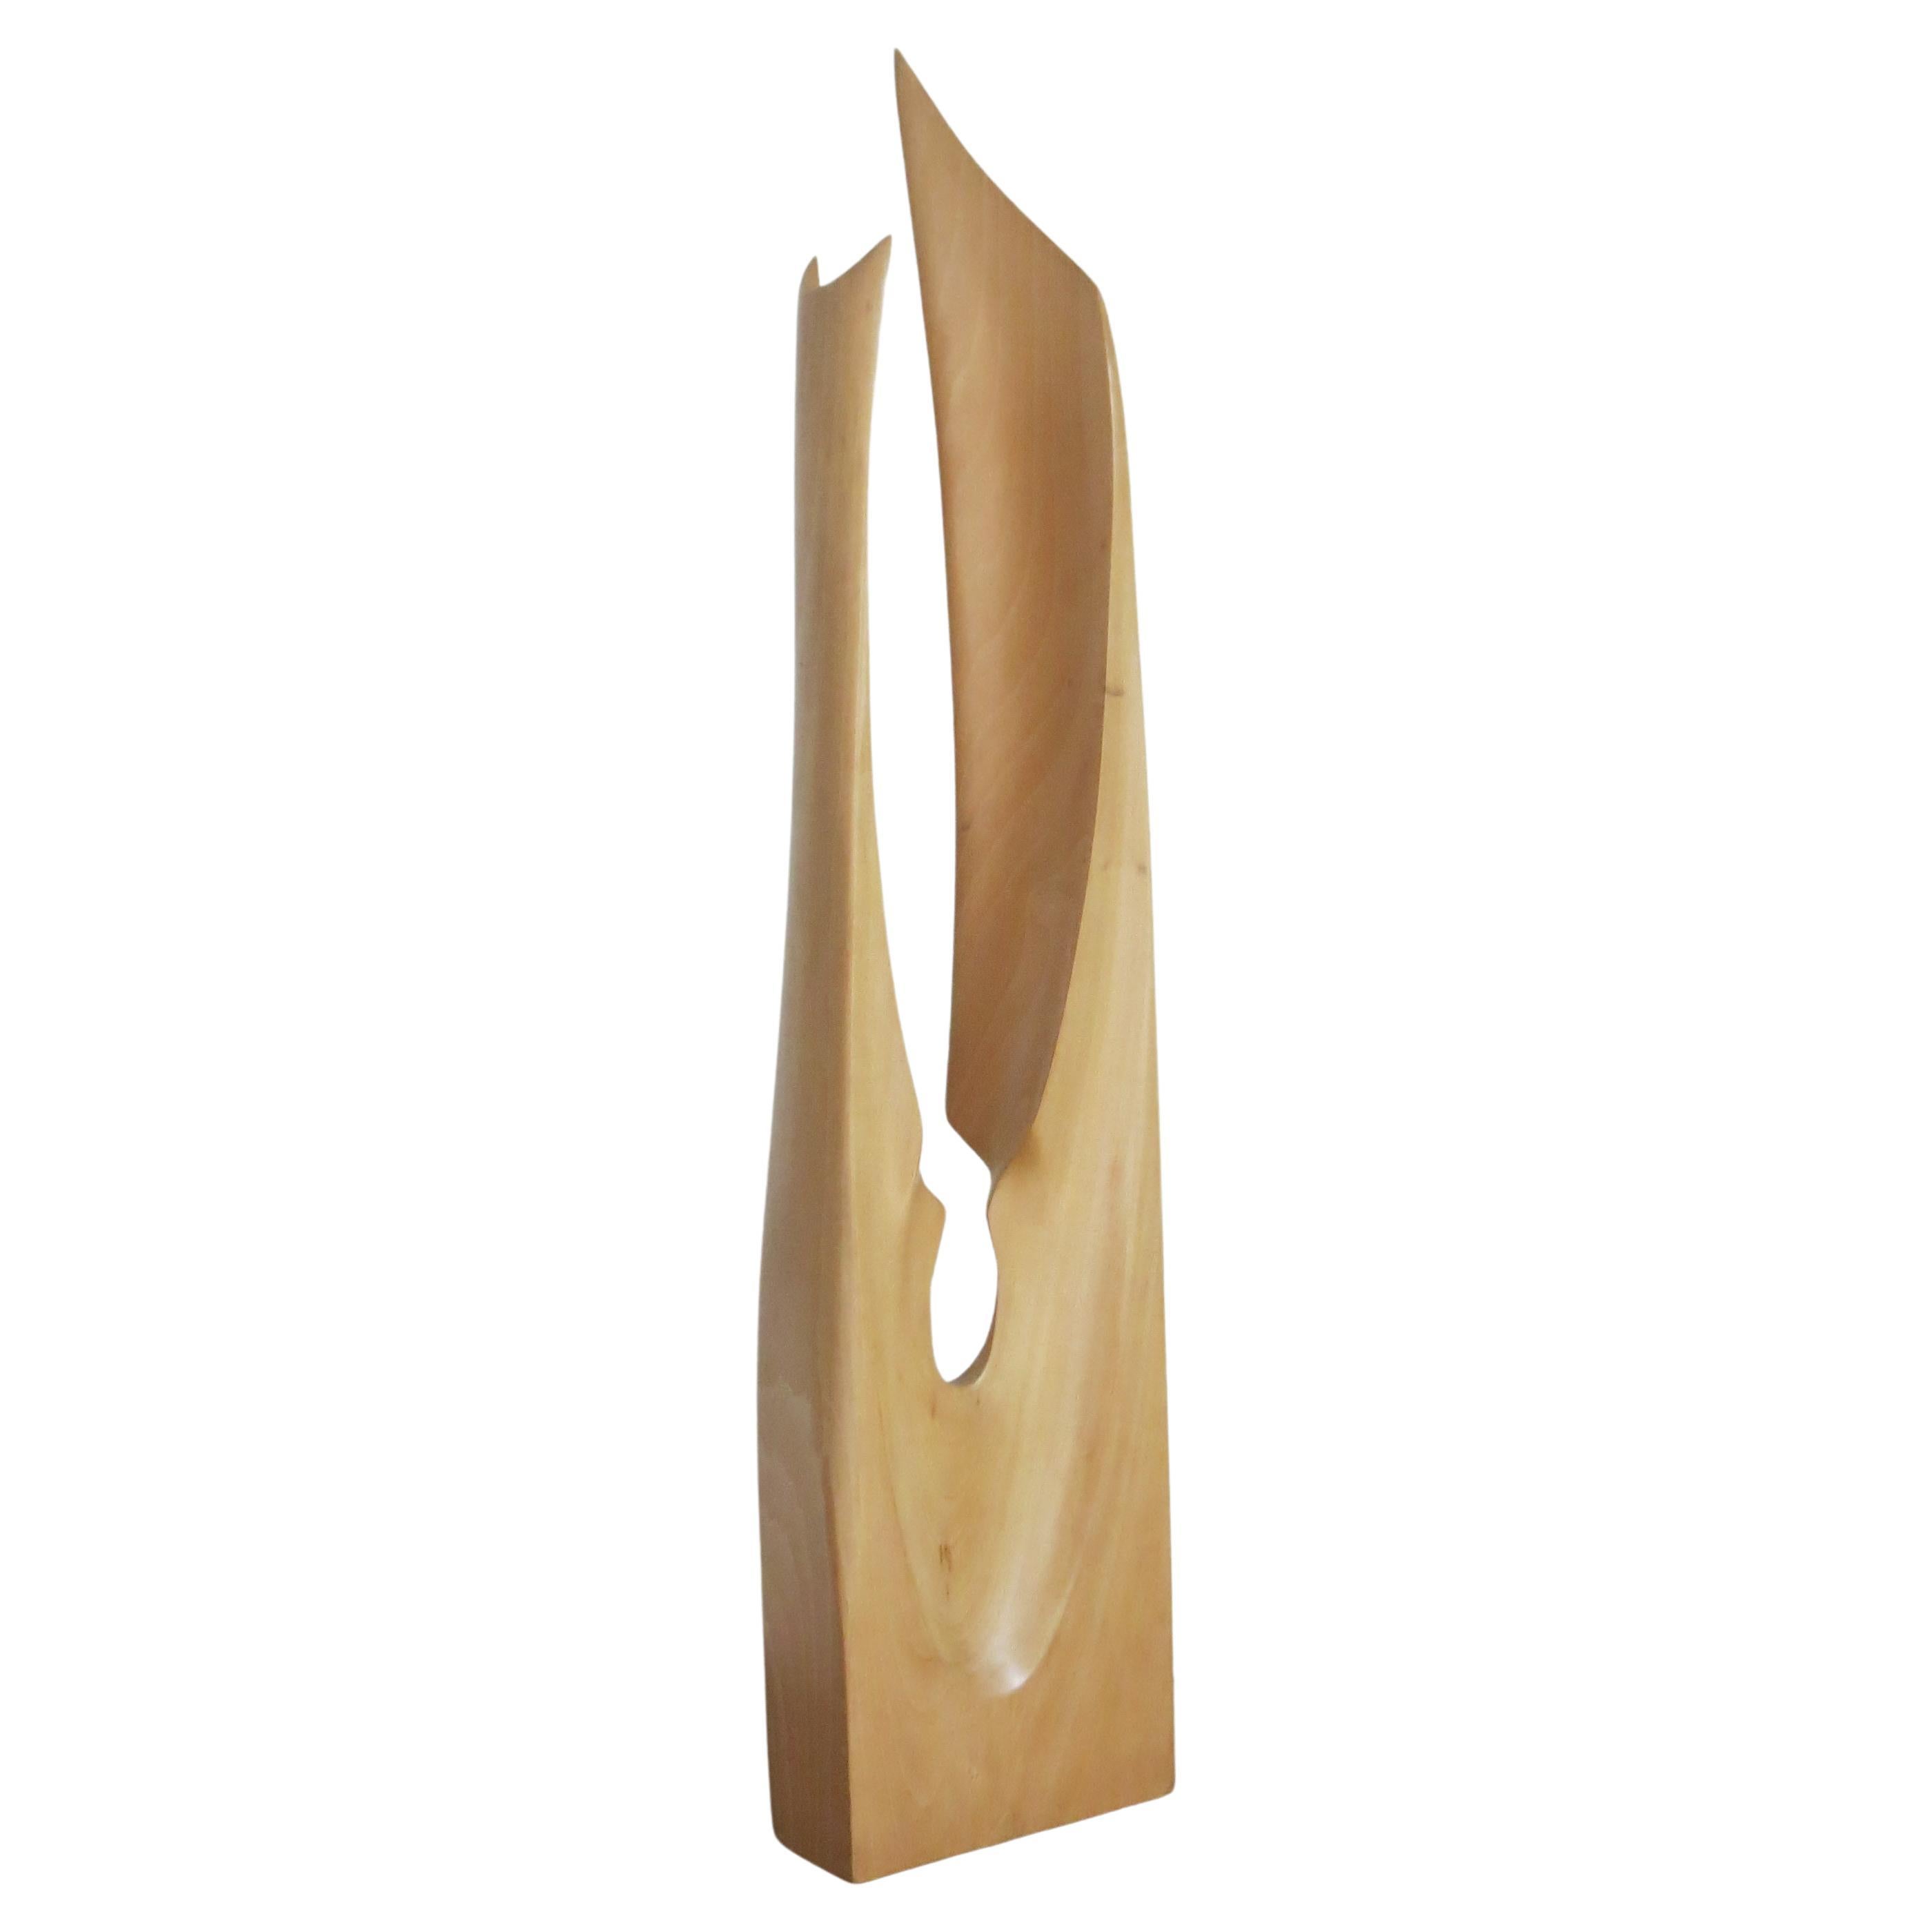 1970s Hand Crafted Wooden Sculpture Barbara Hepworth Style